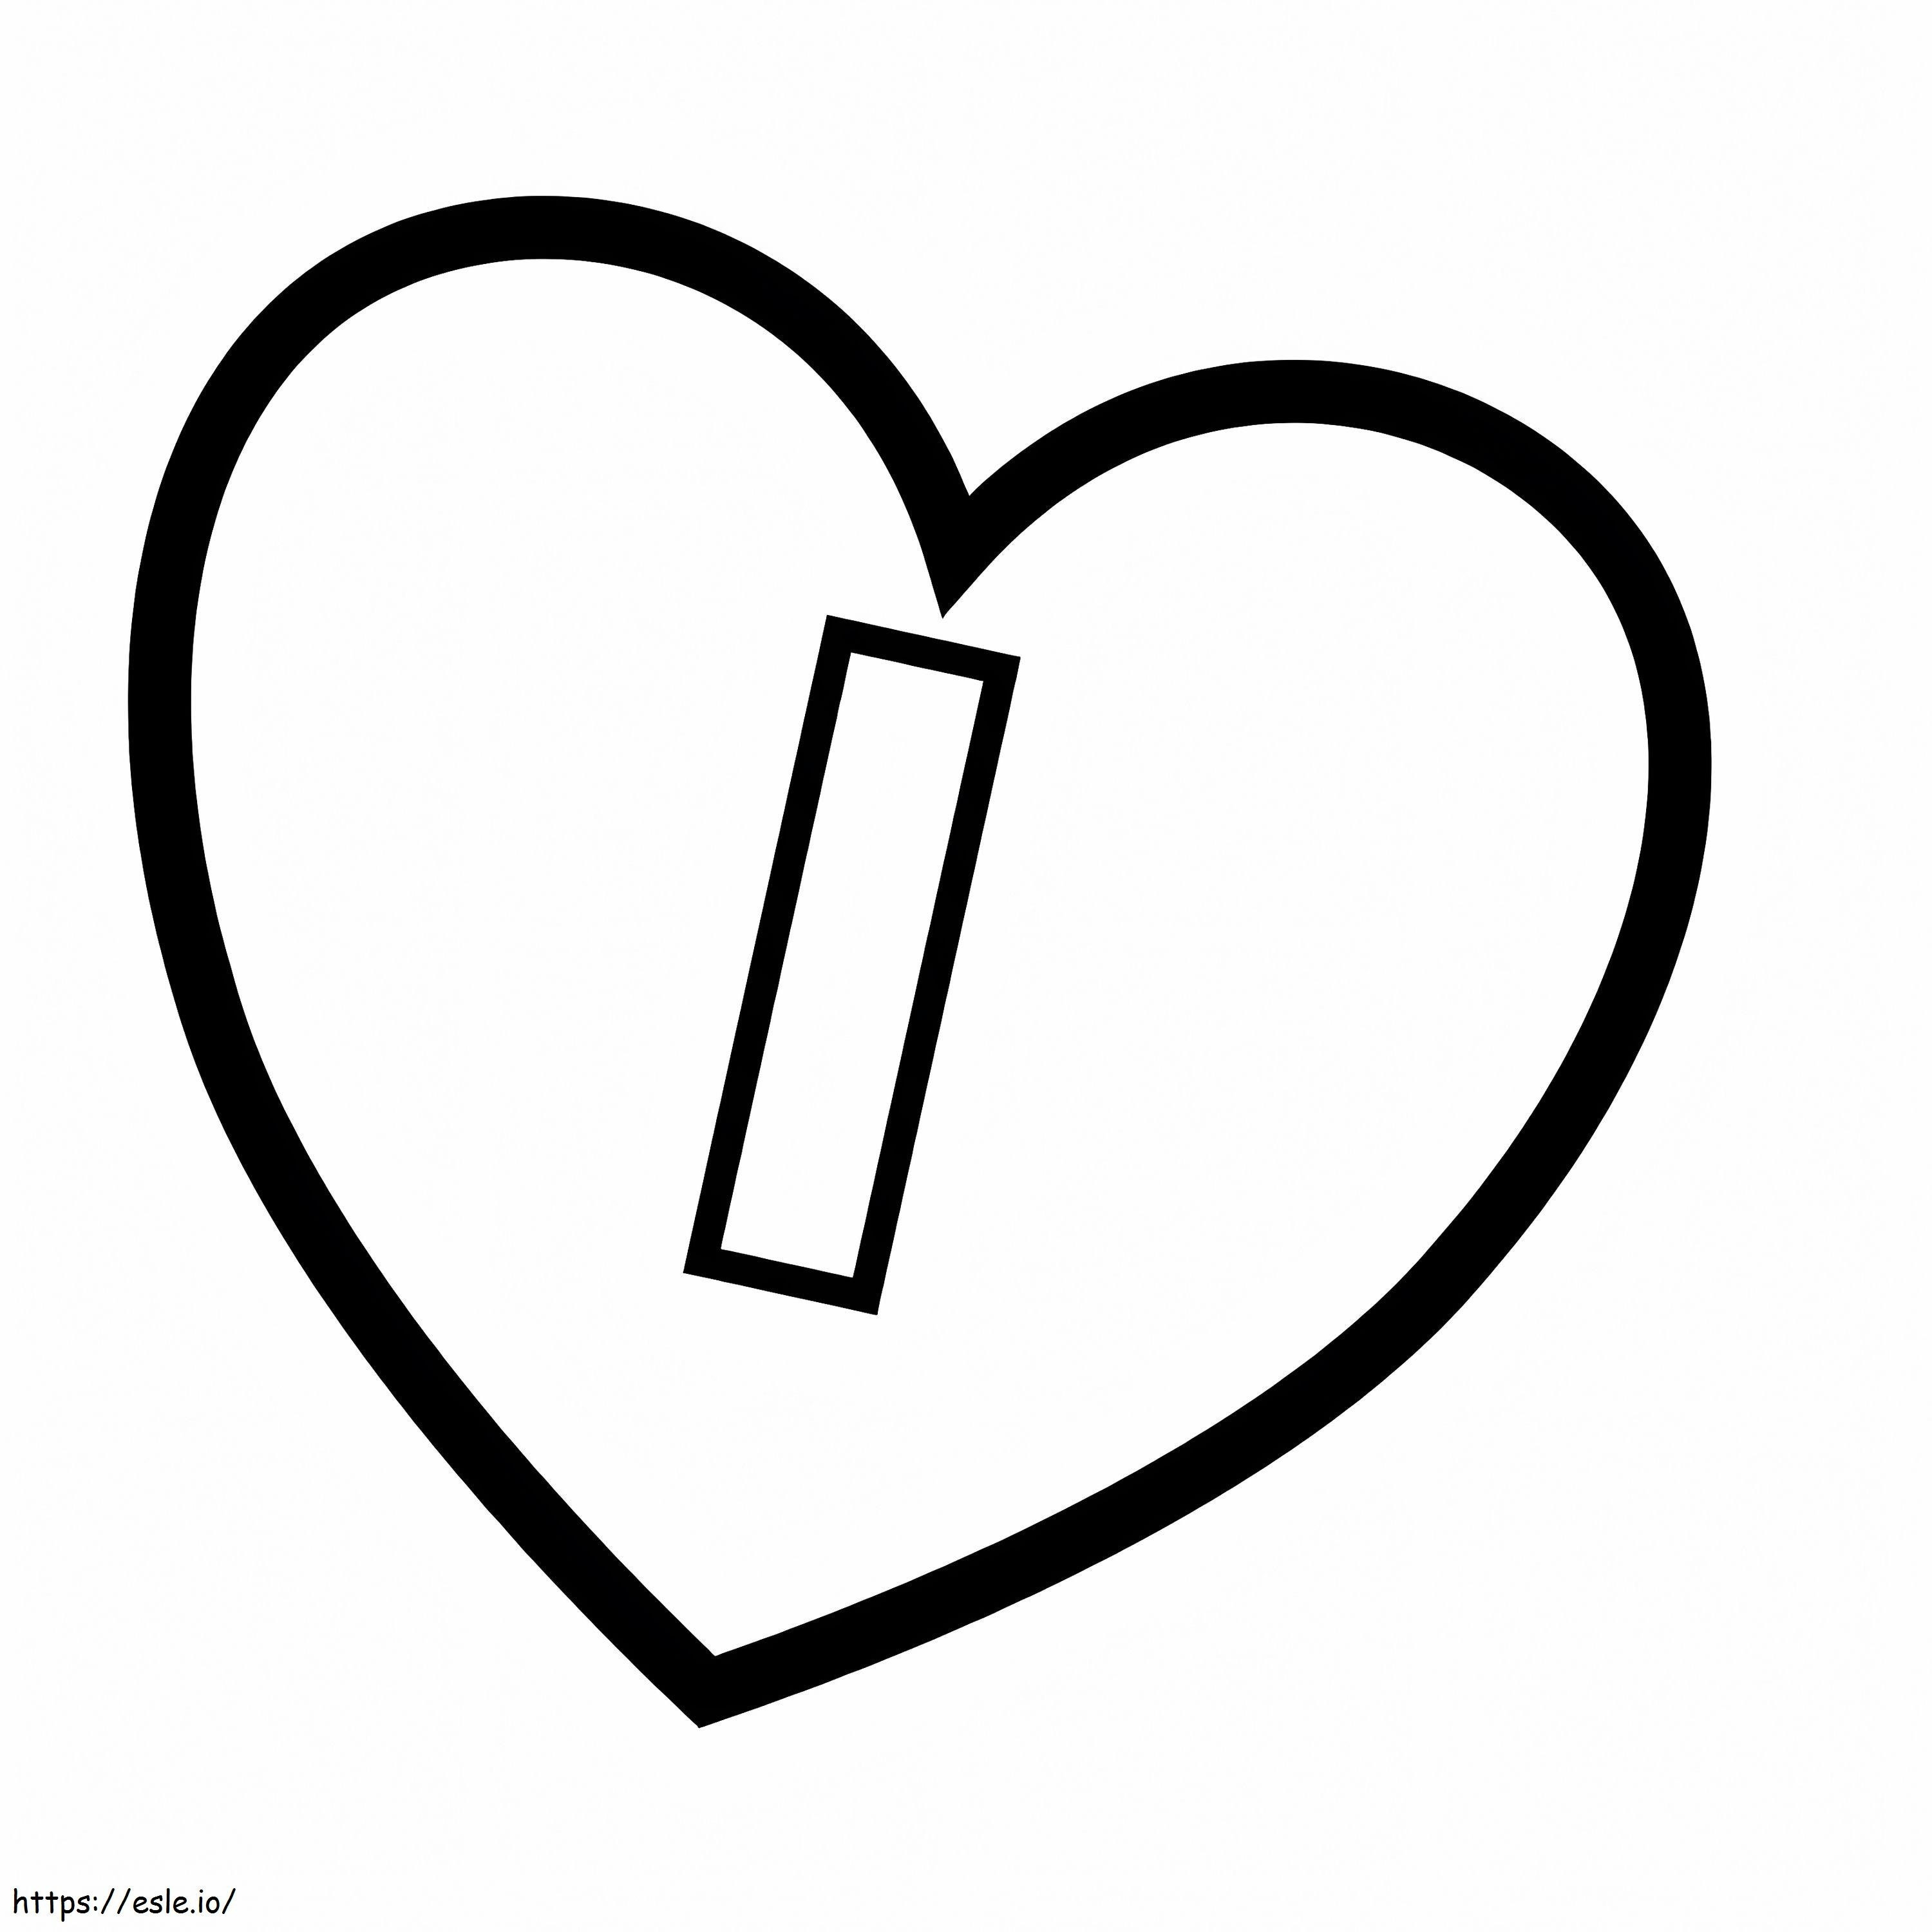 Letter I 2 coloring page